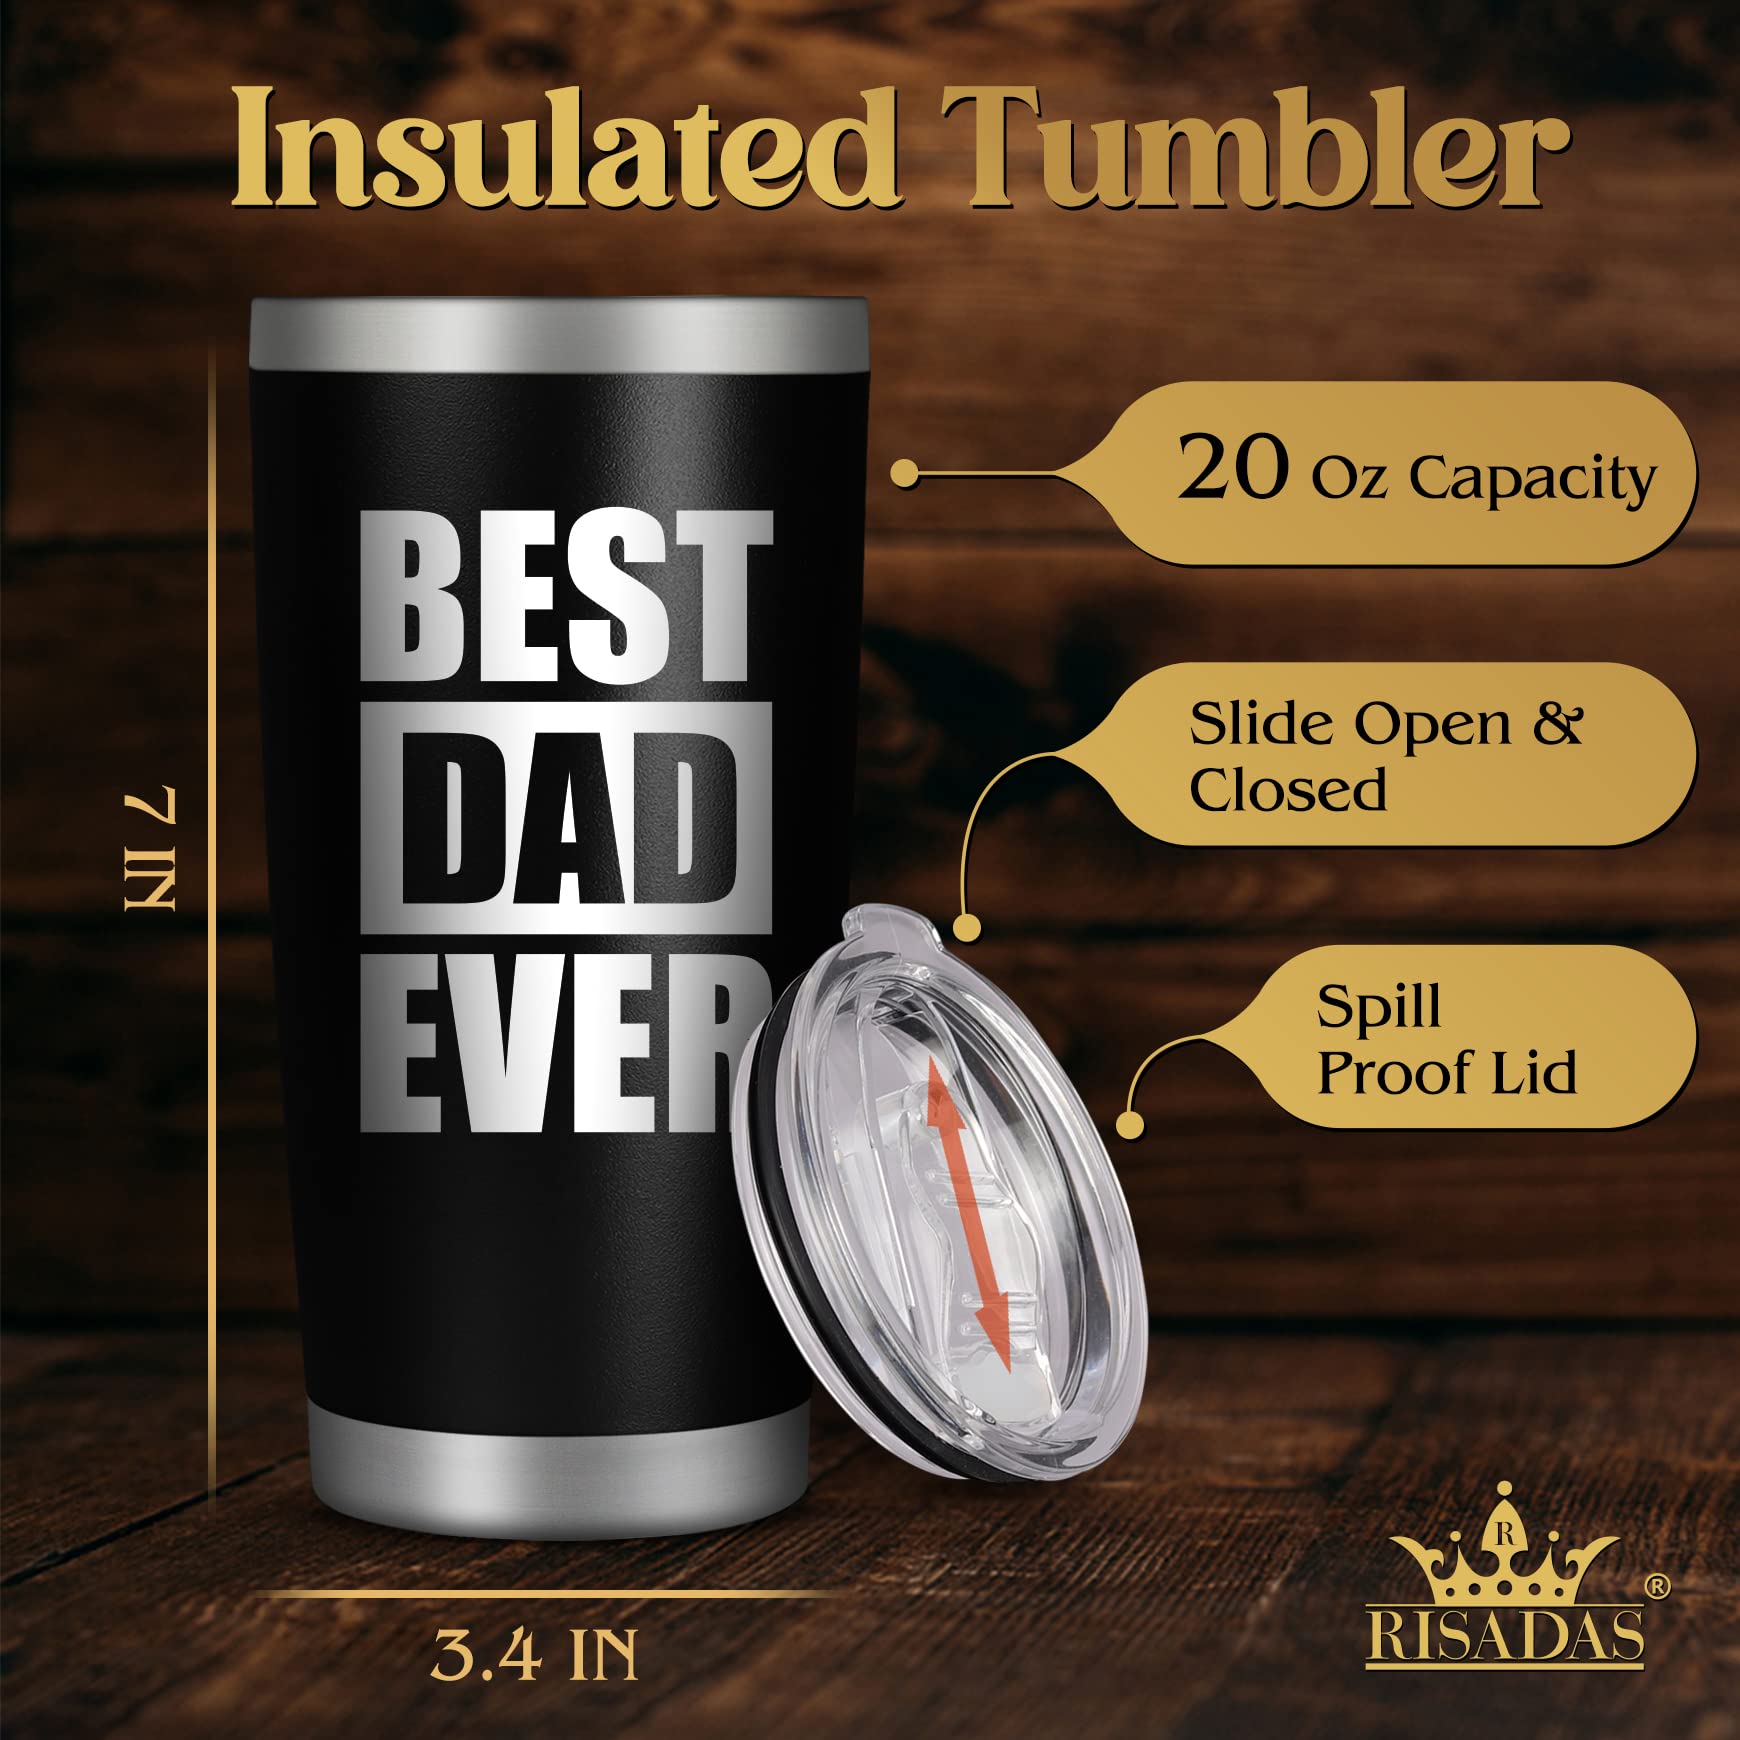 Papa Gifts - Fathers Day Perfect Gifts for Papa, Papa Gifts from Grandchildren - Birthday Gifts for Papa - Grandparents Gifts - Father's Day Gift for Papa, Best Papa Ever, 20 oz Tumbler